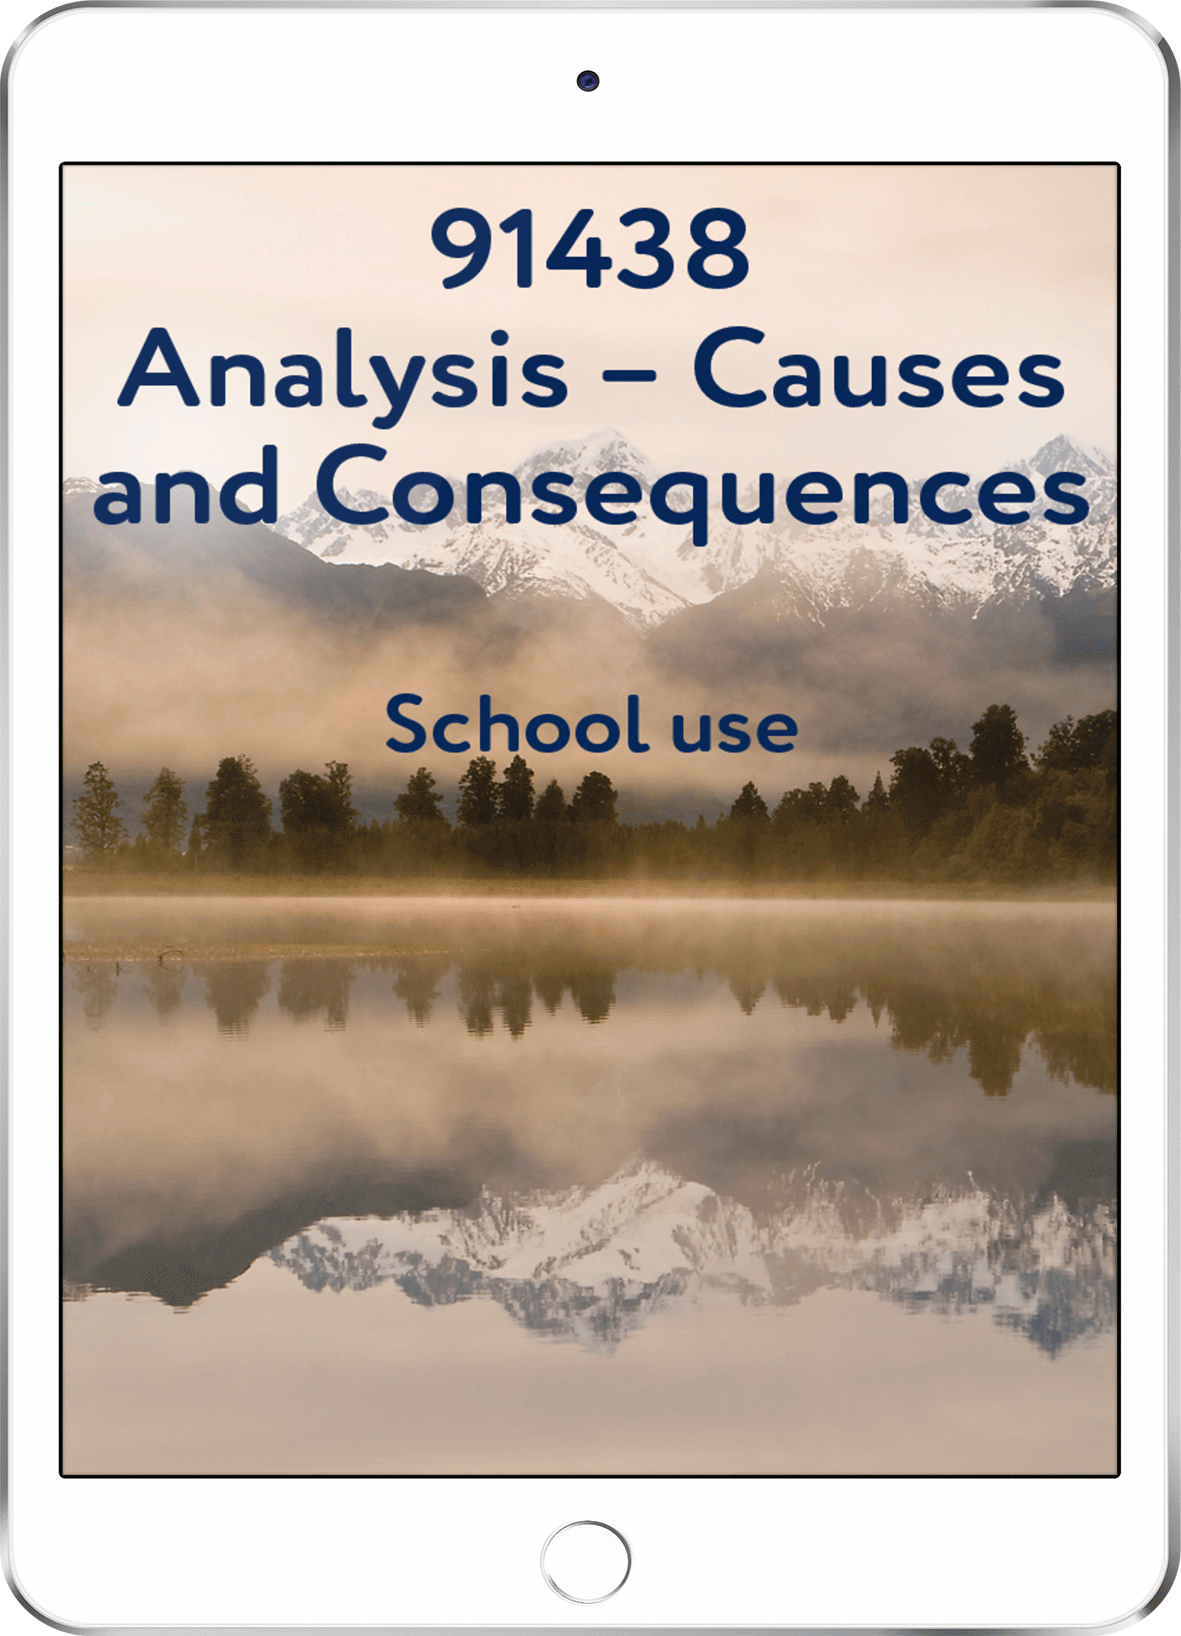 91438 Analysis - Causes and Consequences - School Use